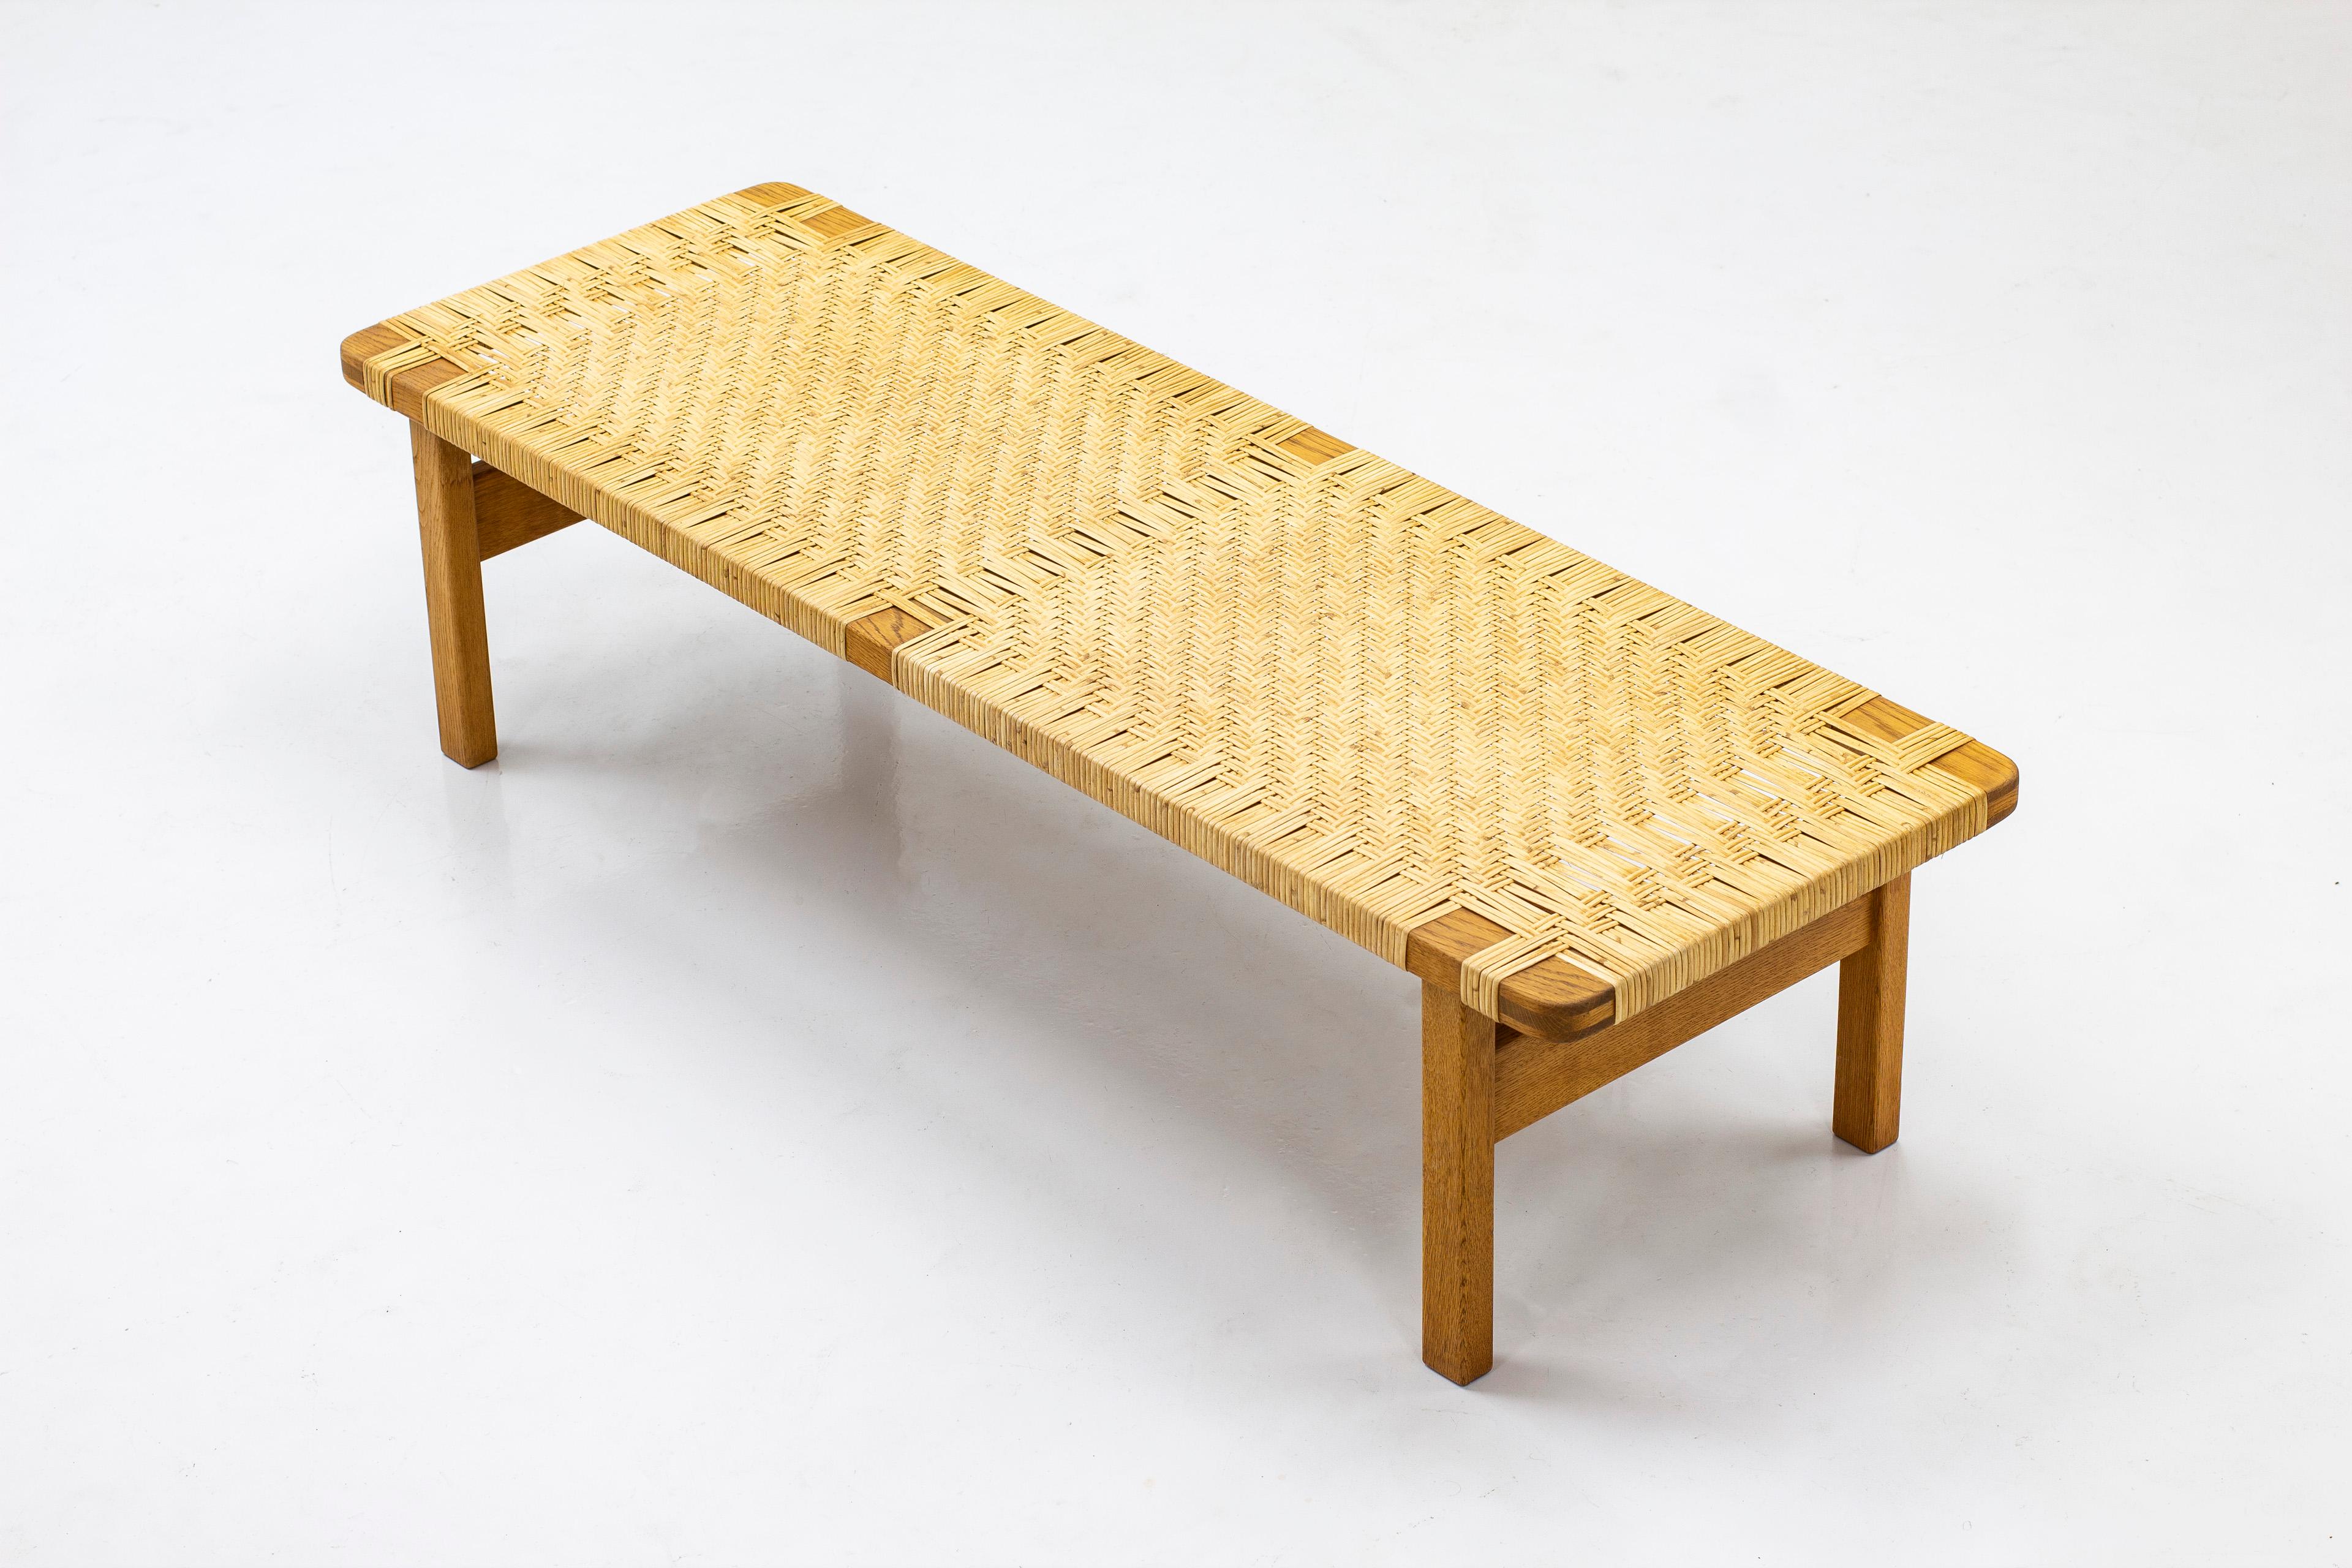 Coffee table/bench model 5272 designed by Børge Mogensen. Produced in Denmark by Fredericia furniture in the late 1950s-60s. Made from solid oak with cane webbing. Very good vintage condition with patina from age and use.

  